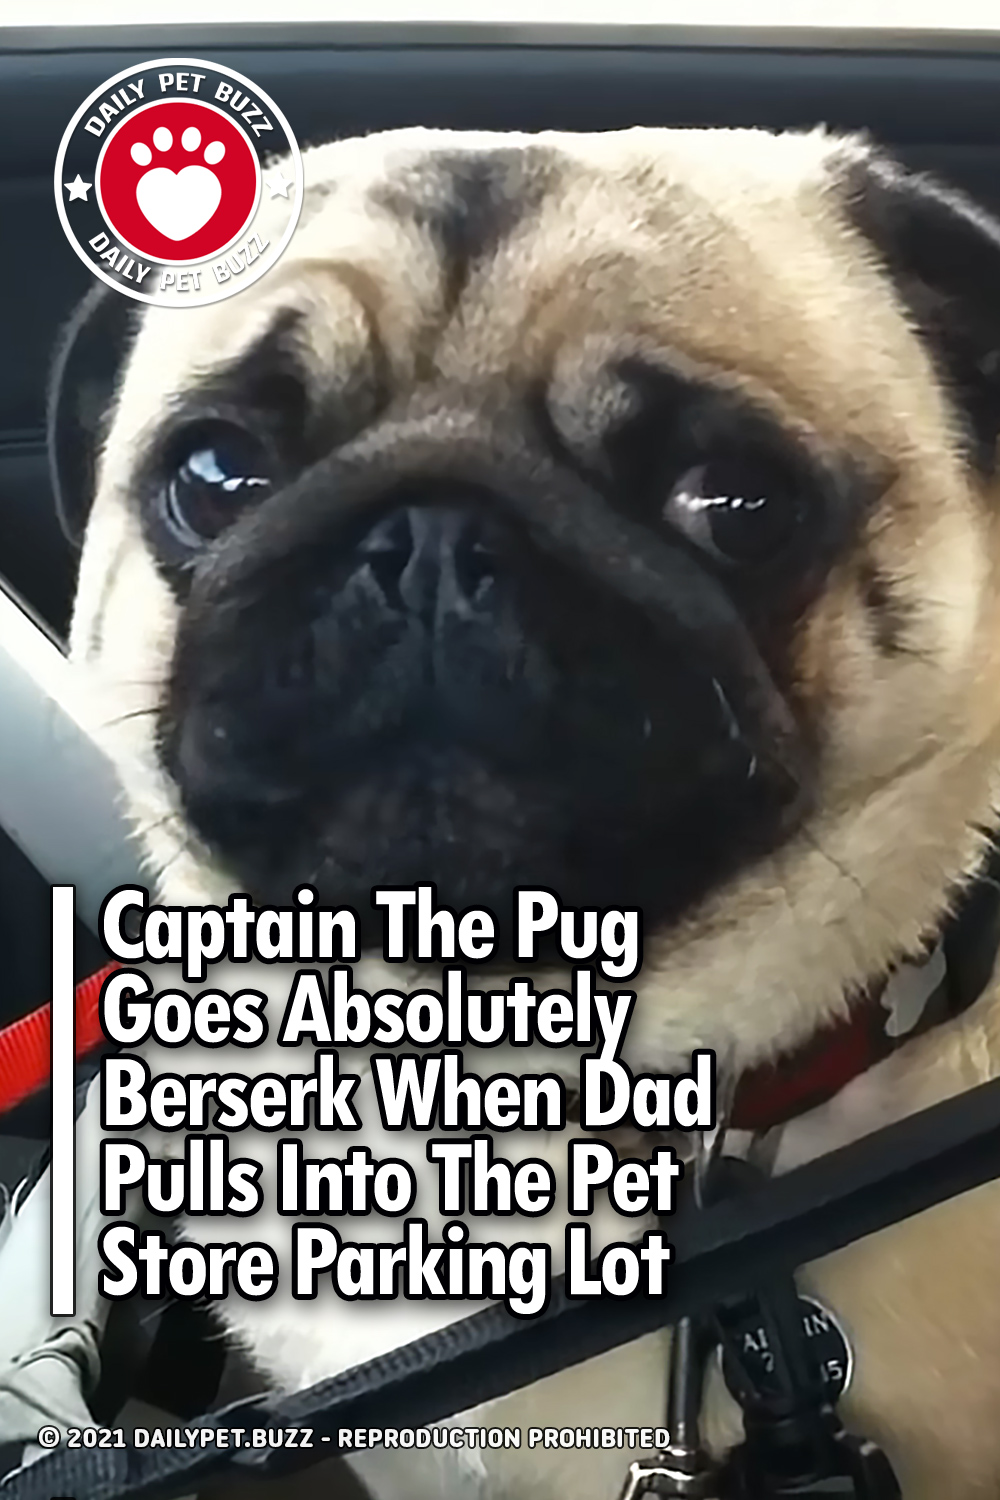 Captain The Pug Goes Absolutely Berserk When Dad Pulls Into The Pet Store Parking Lot